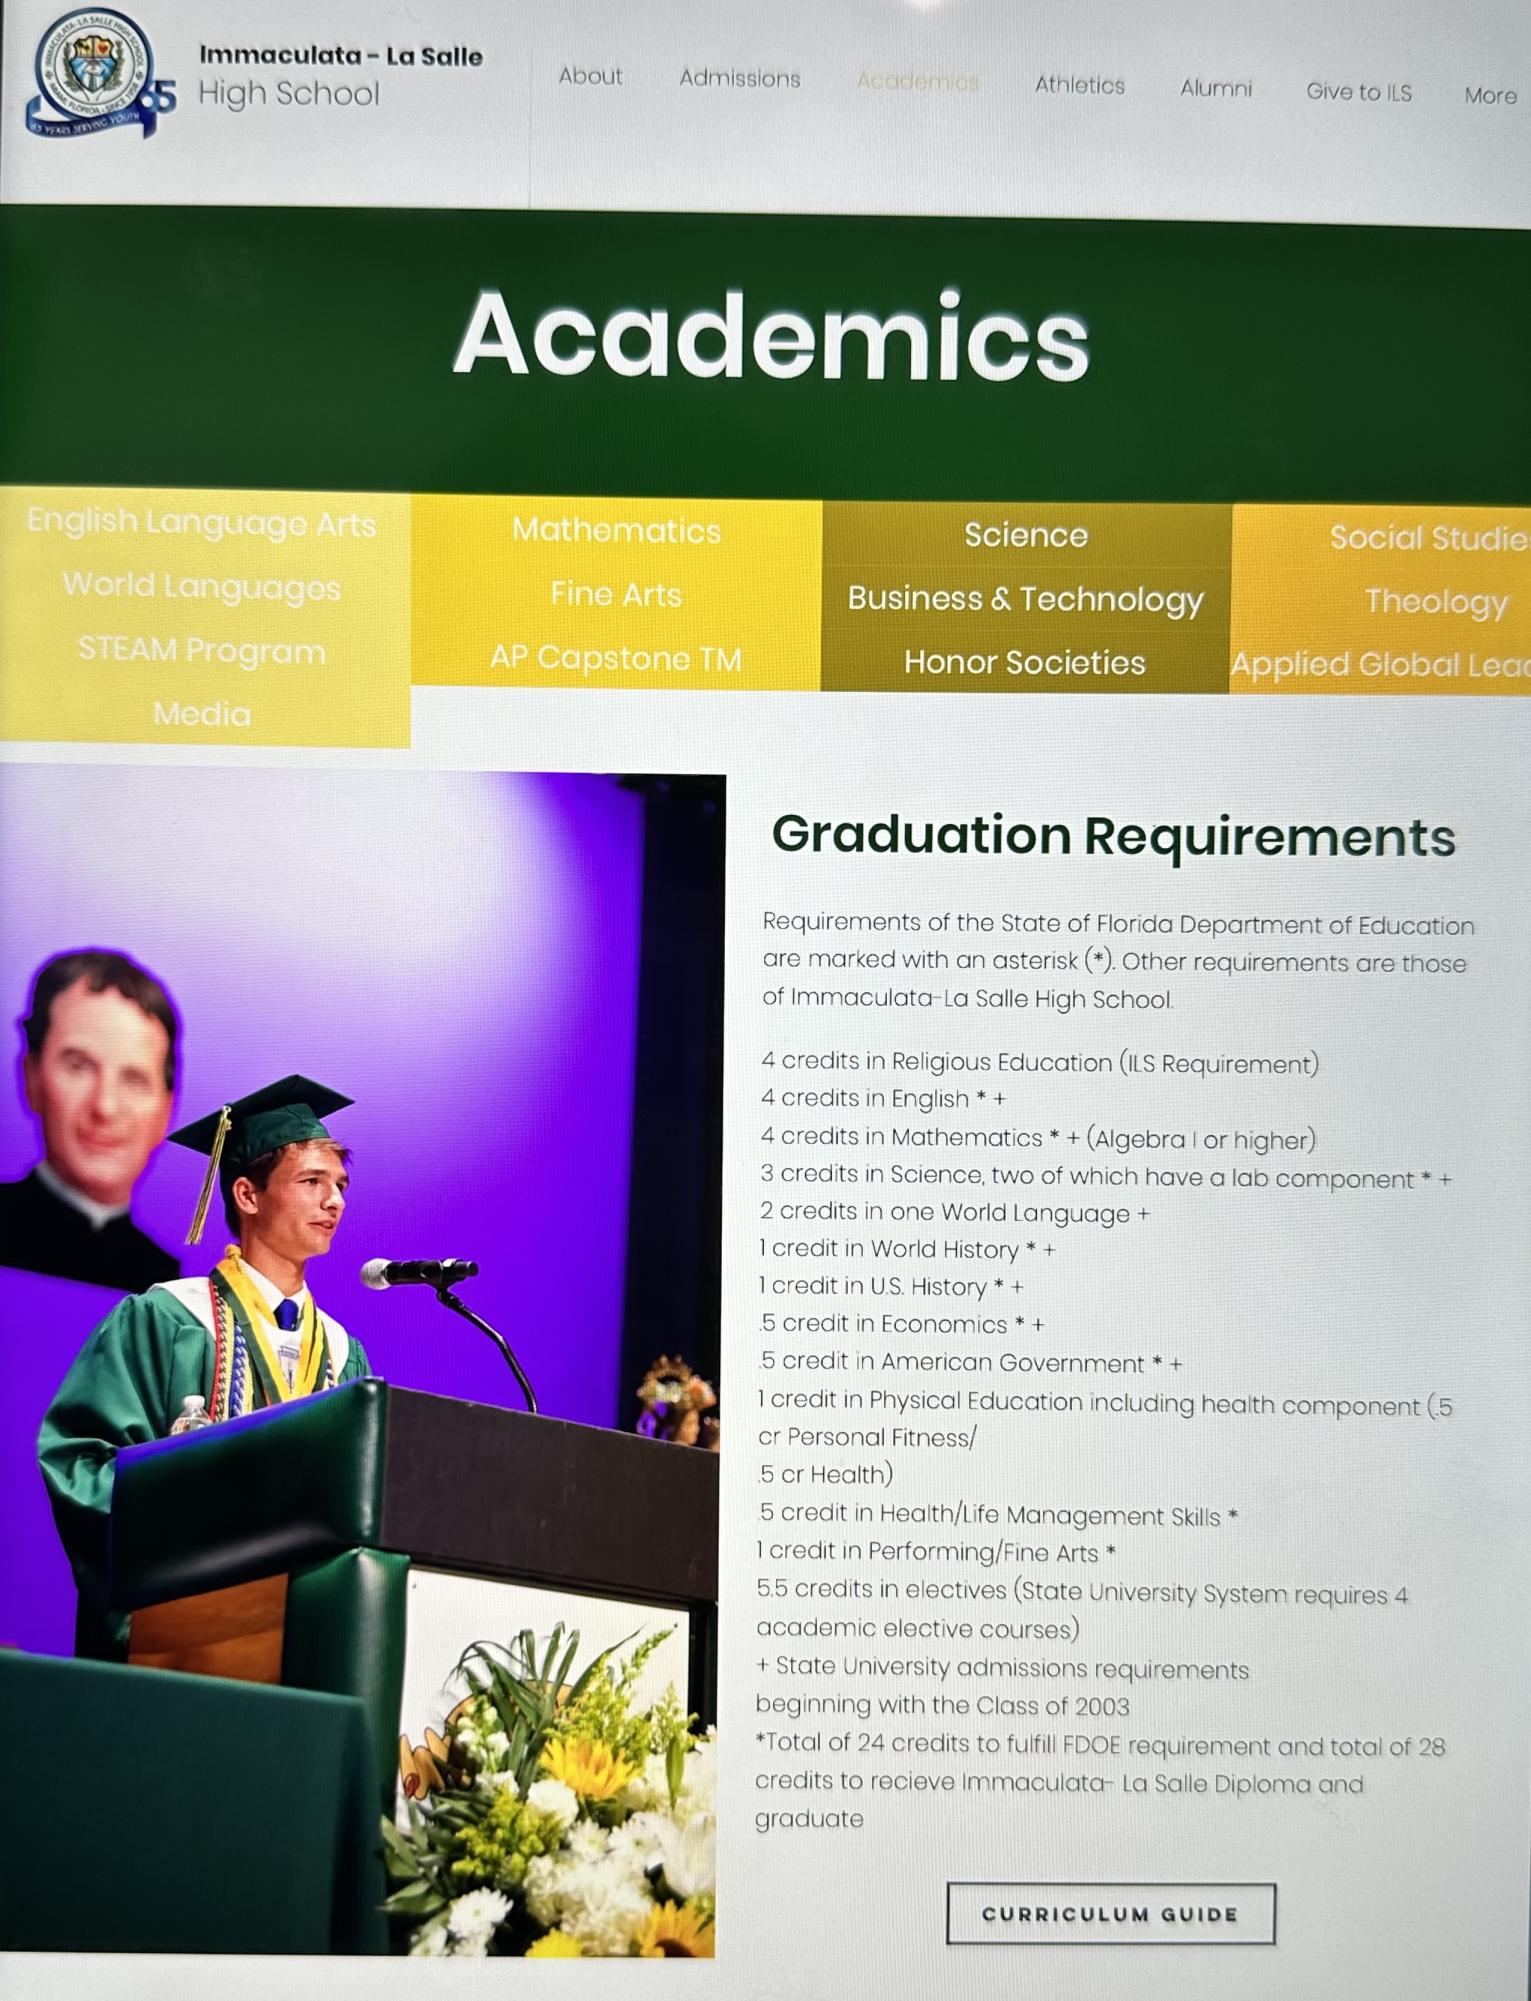 The ILS website image of graduation requirements contains many important details seniors need to know.